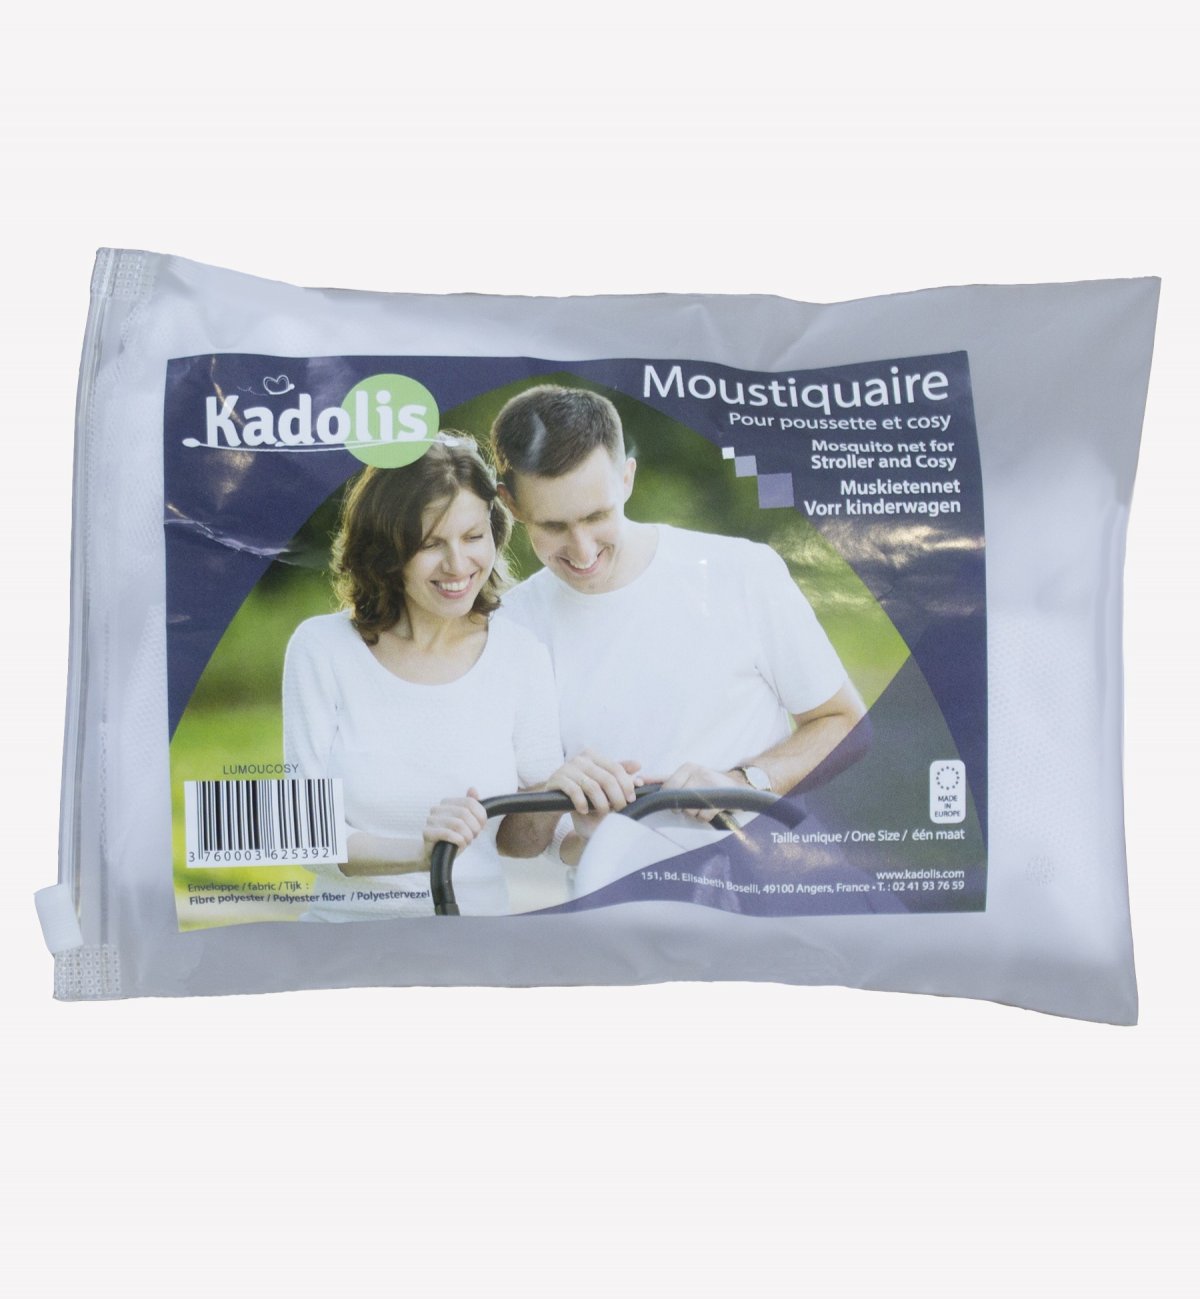 Baby mosquito net for stroller and cosy - Kadolis